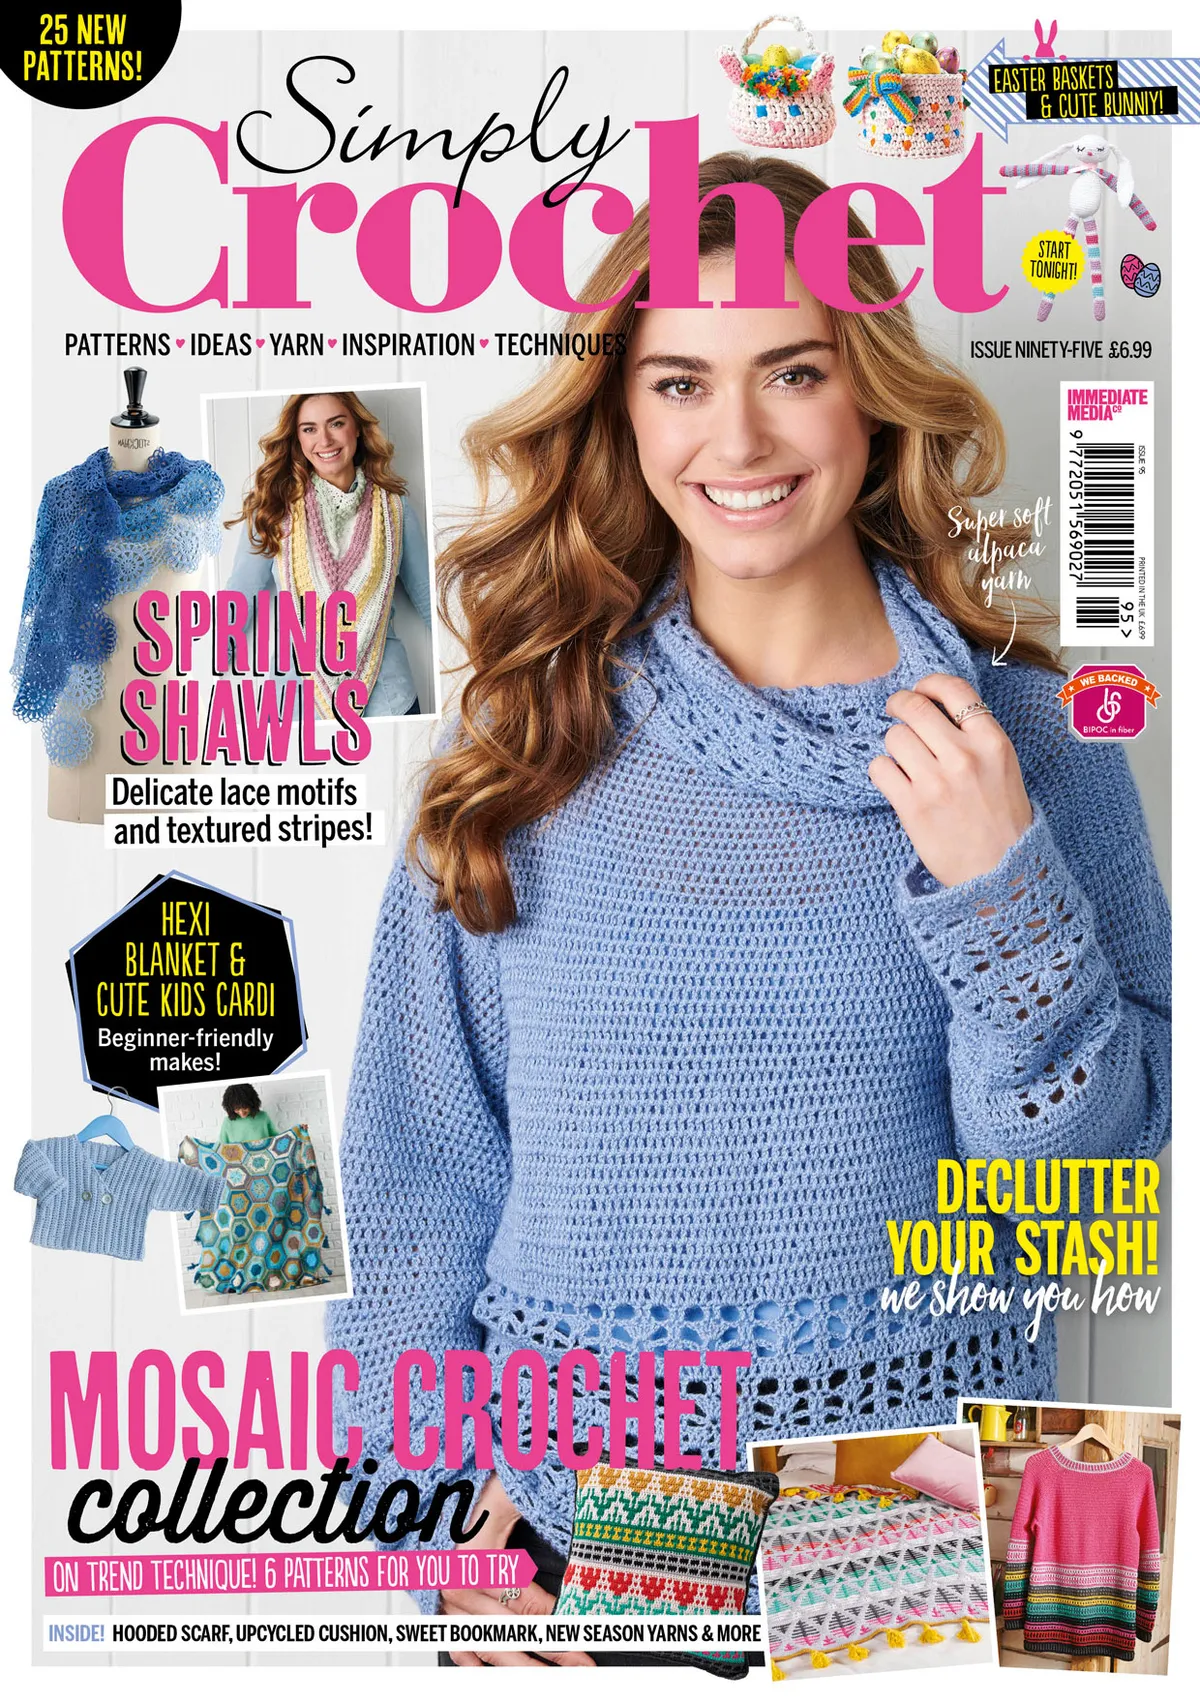 Simply_Crochet_issue95